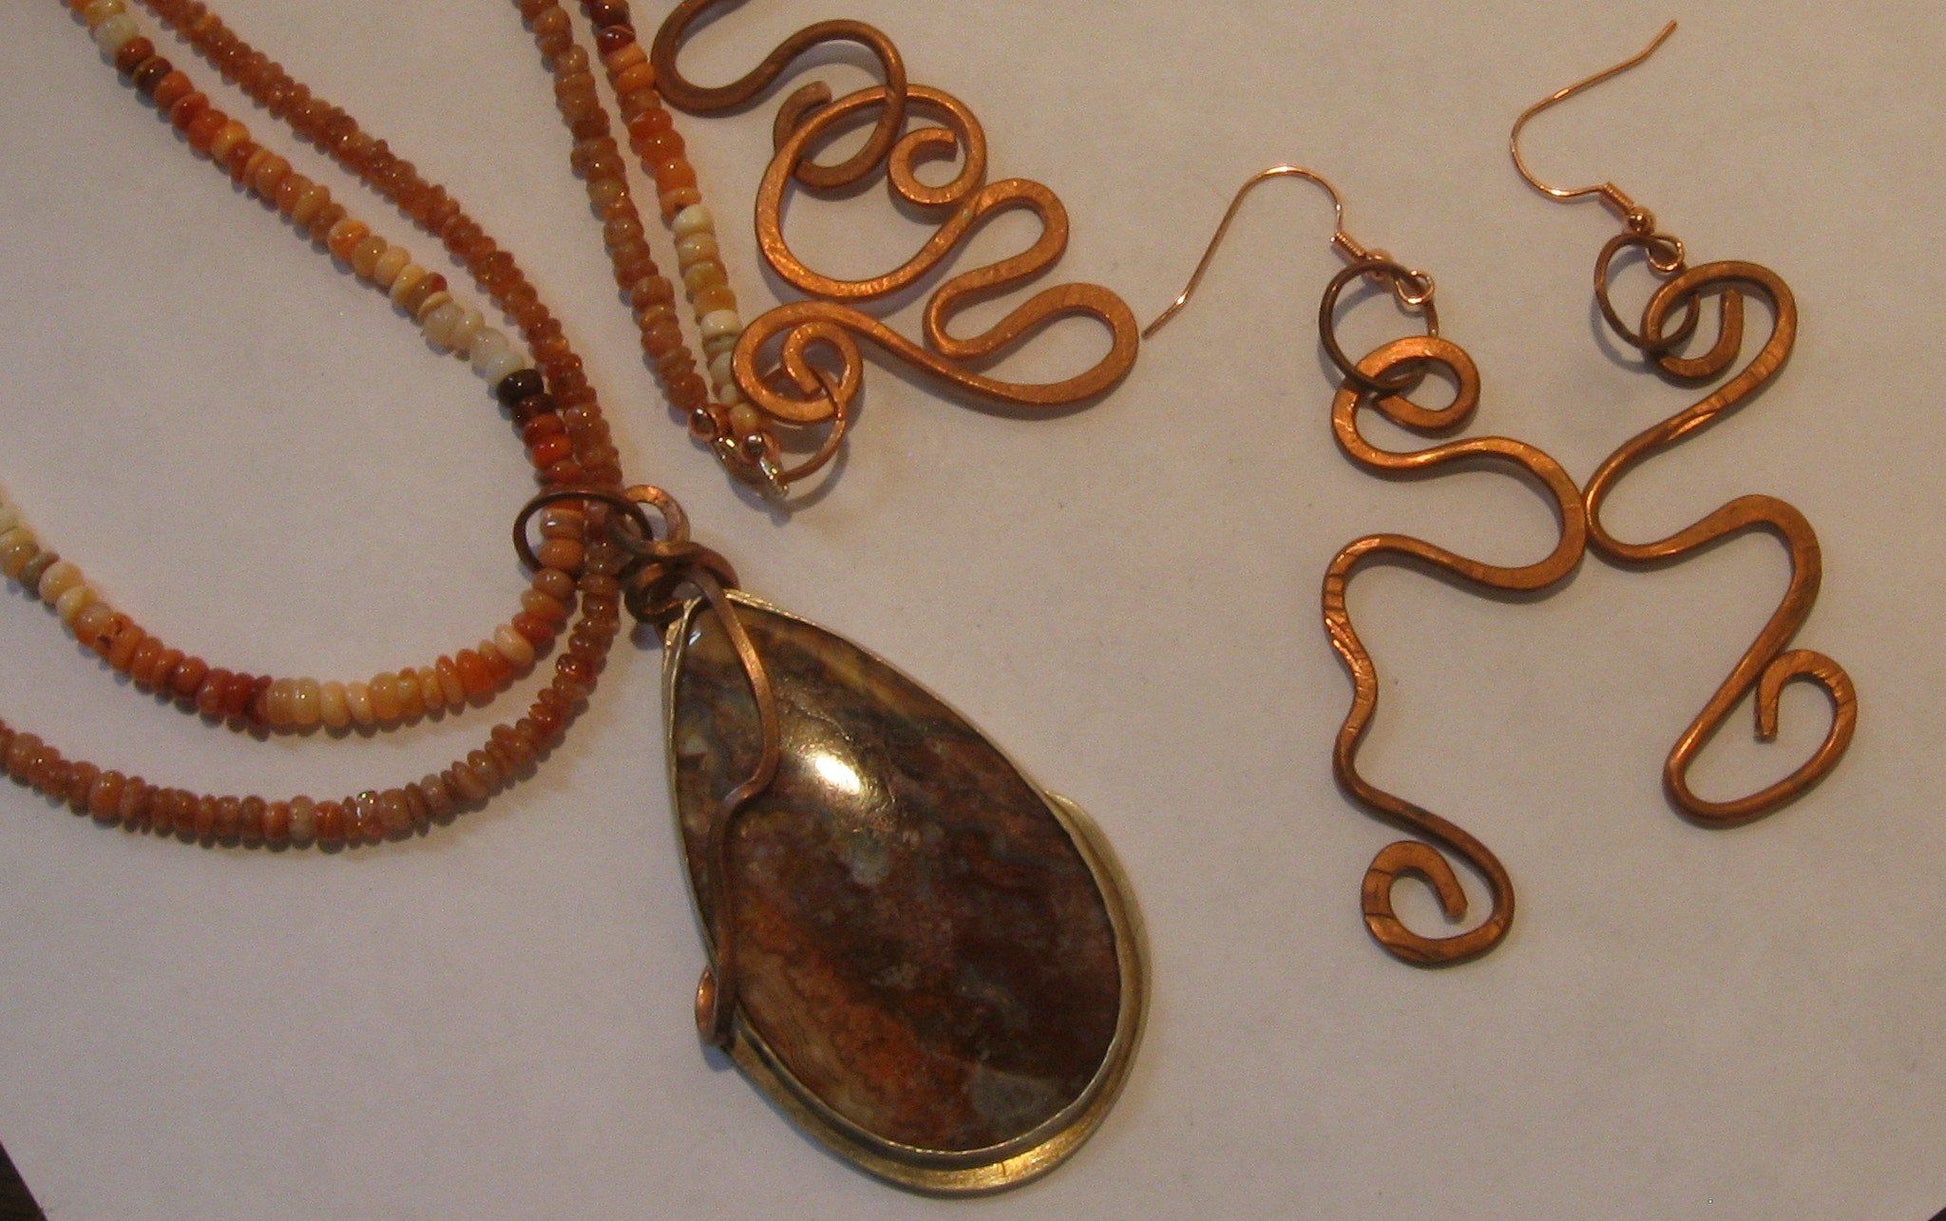 Mexican Laguna Lace Agate Necklace with Copper Earrings | Of Coins & Crystals